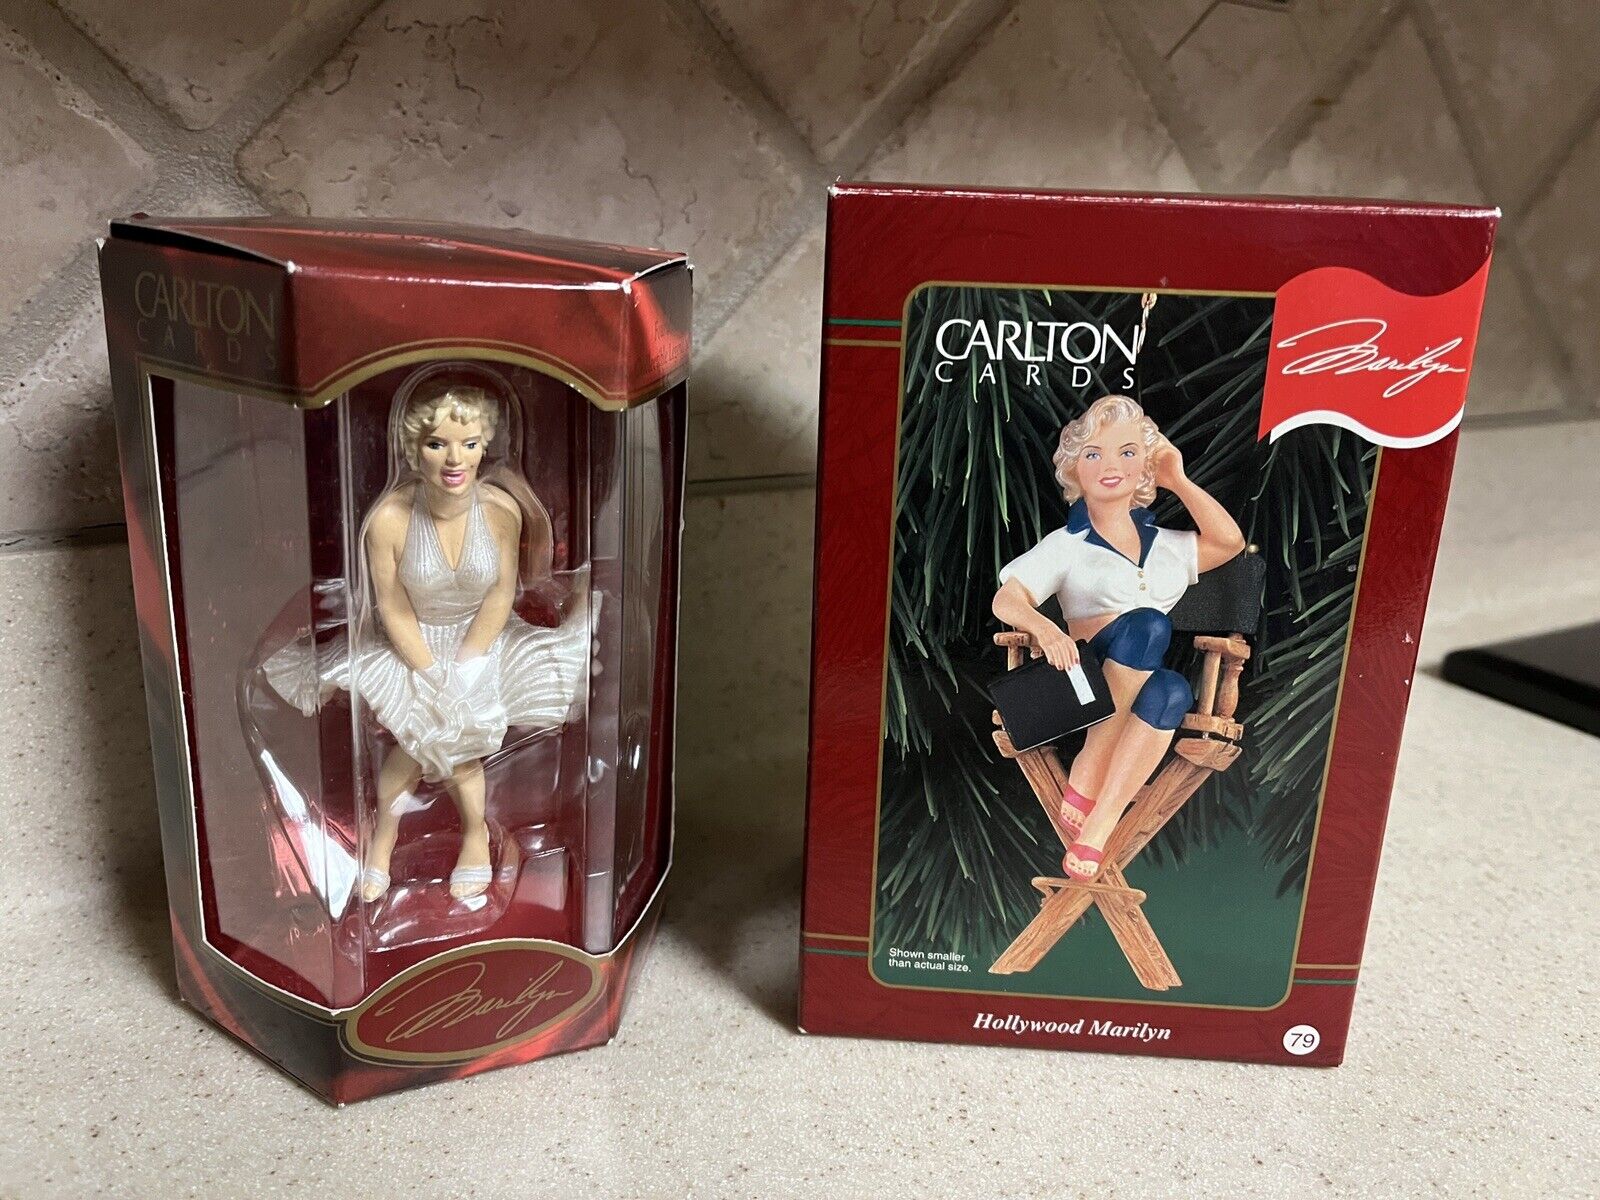 Lot of 2 Vintage Carlton Cards Heirloom Collection Marilyn Monroe Ornaments